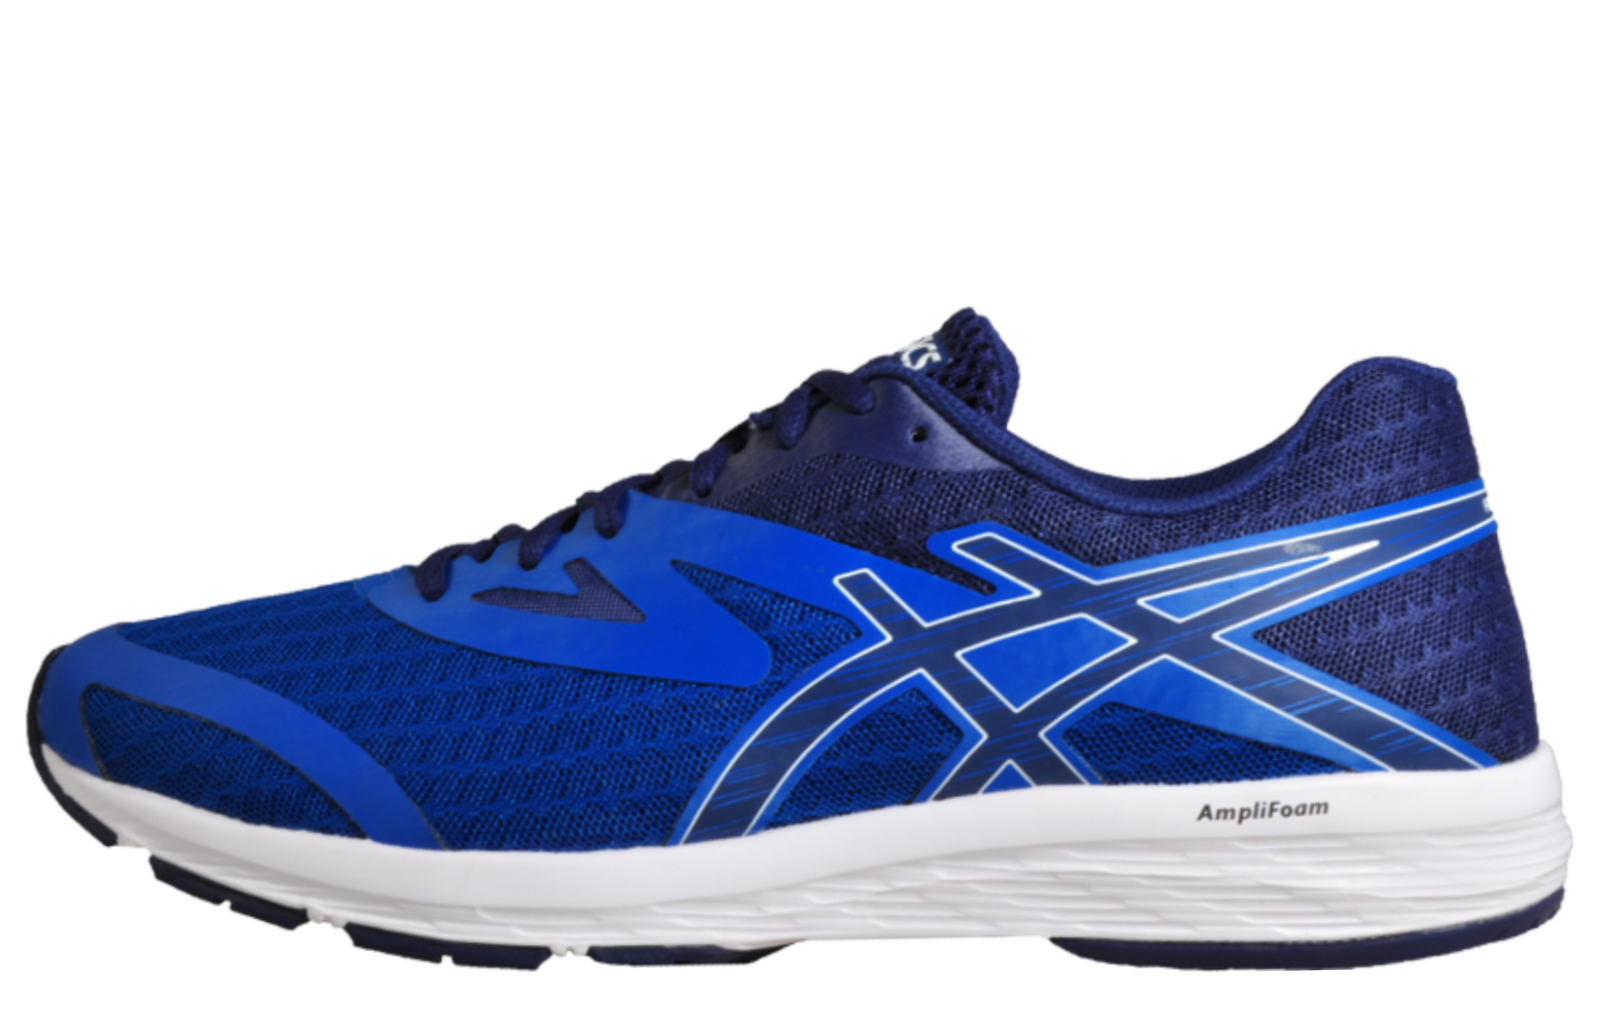 Cheap Asics Trainers | Discount Asics Shoes Sale | Express Trainers